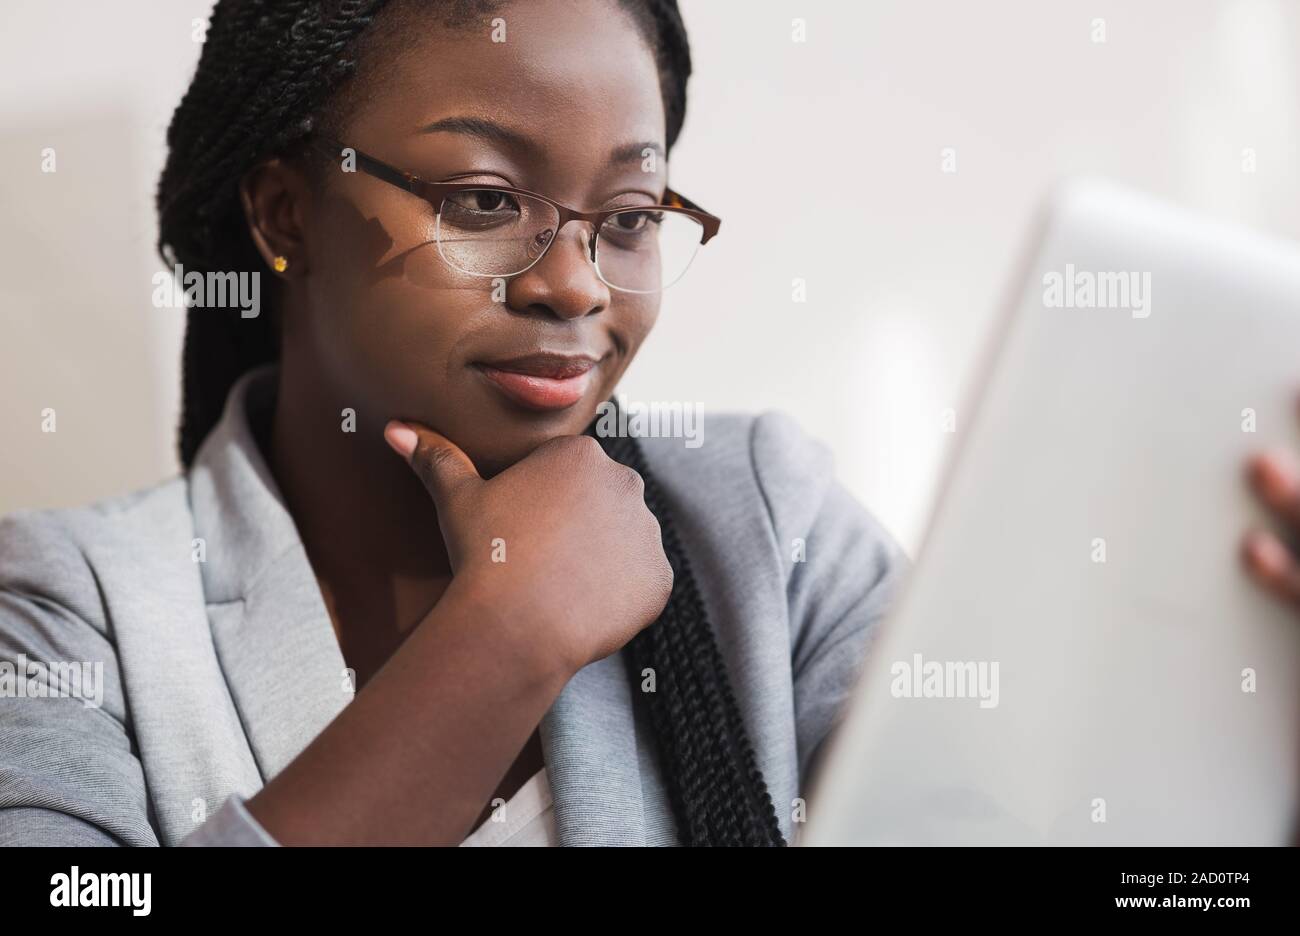 Cleseup Portrait Of Professional Financial Consultant In Glasses Using Digital Tablet Stock Photo